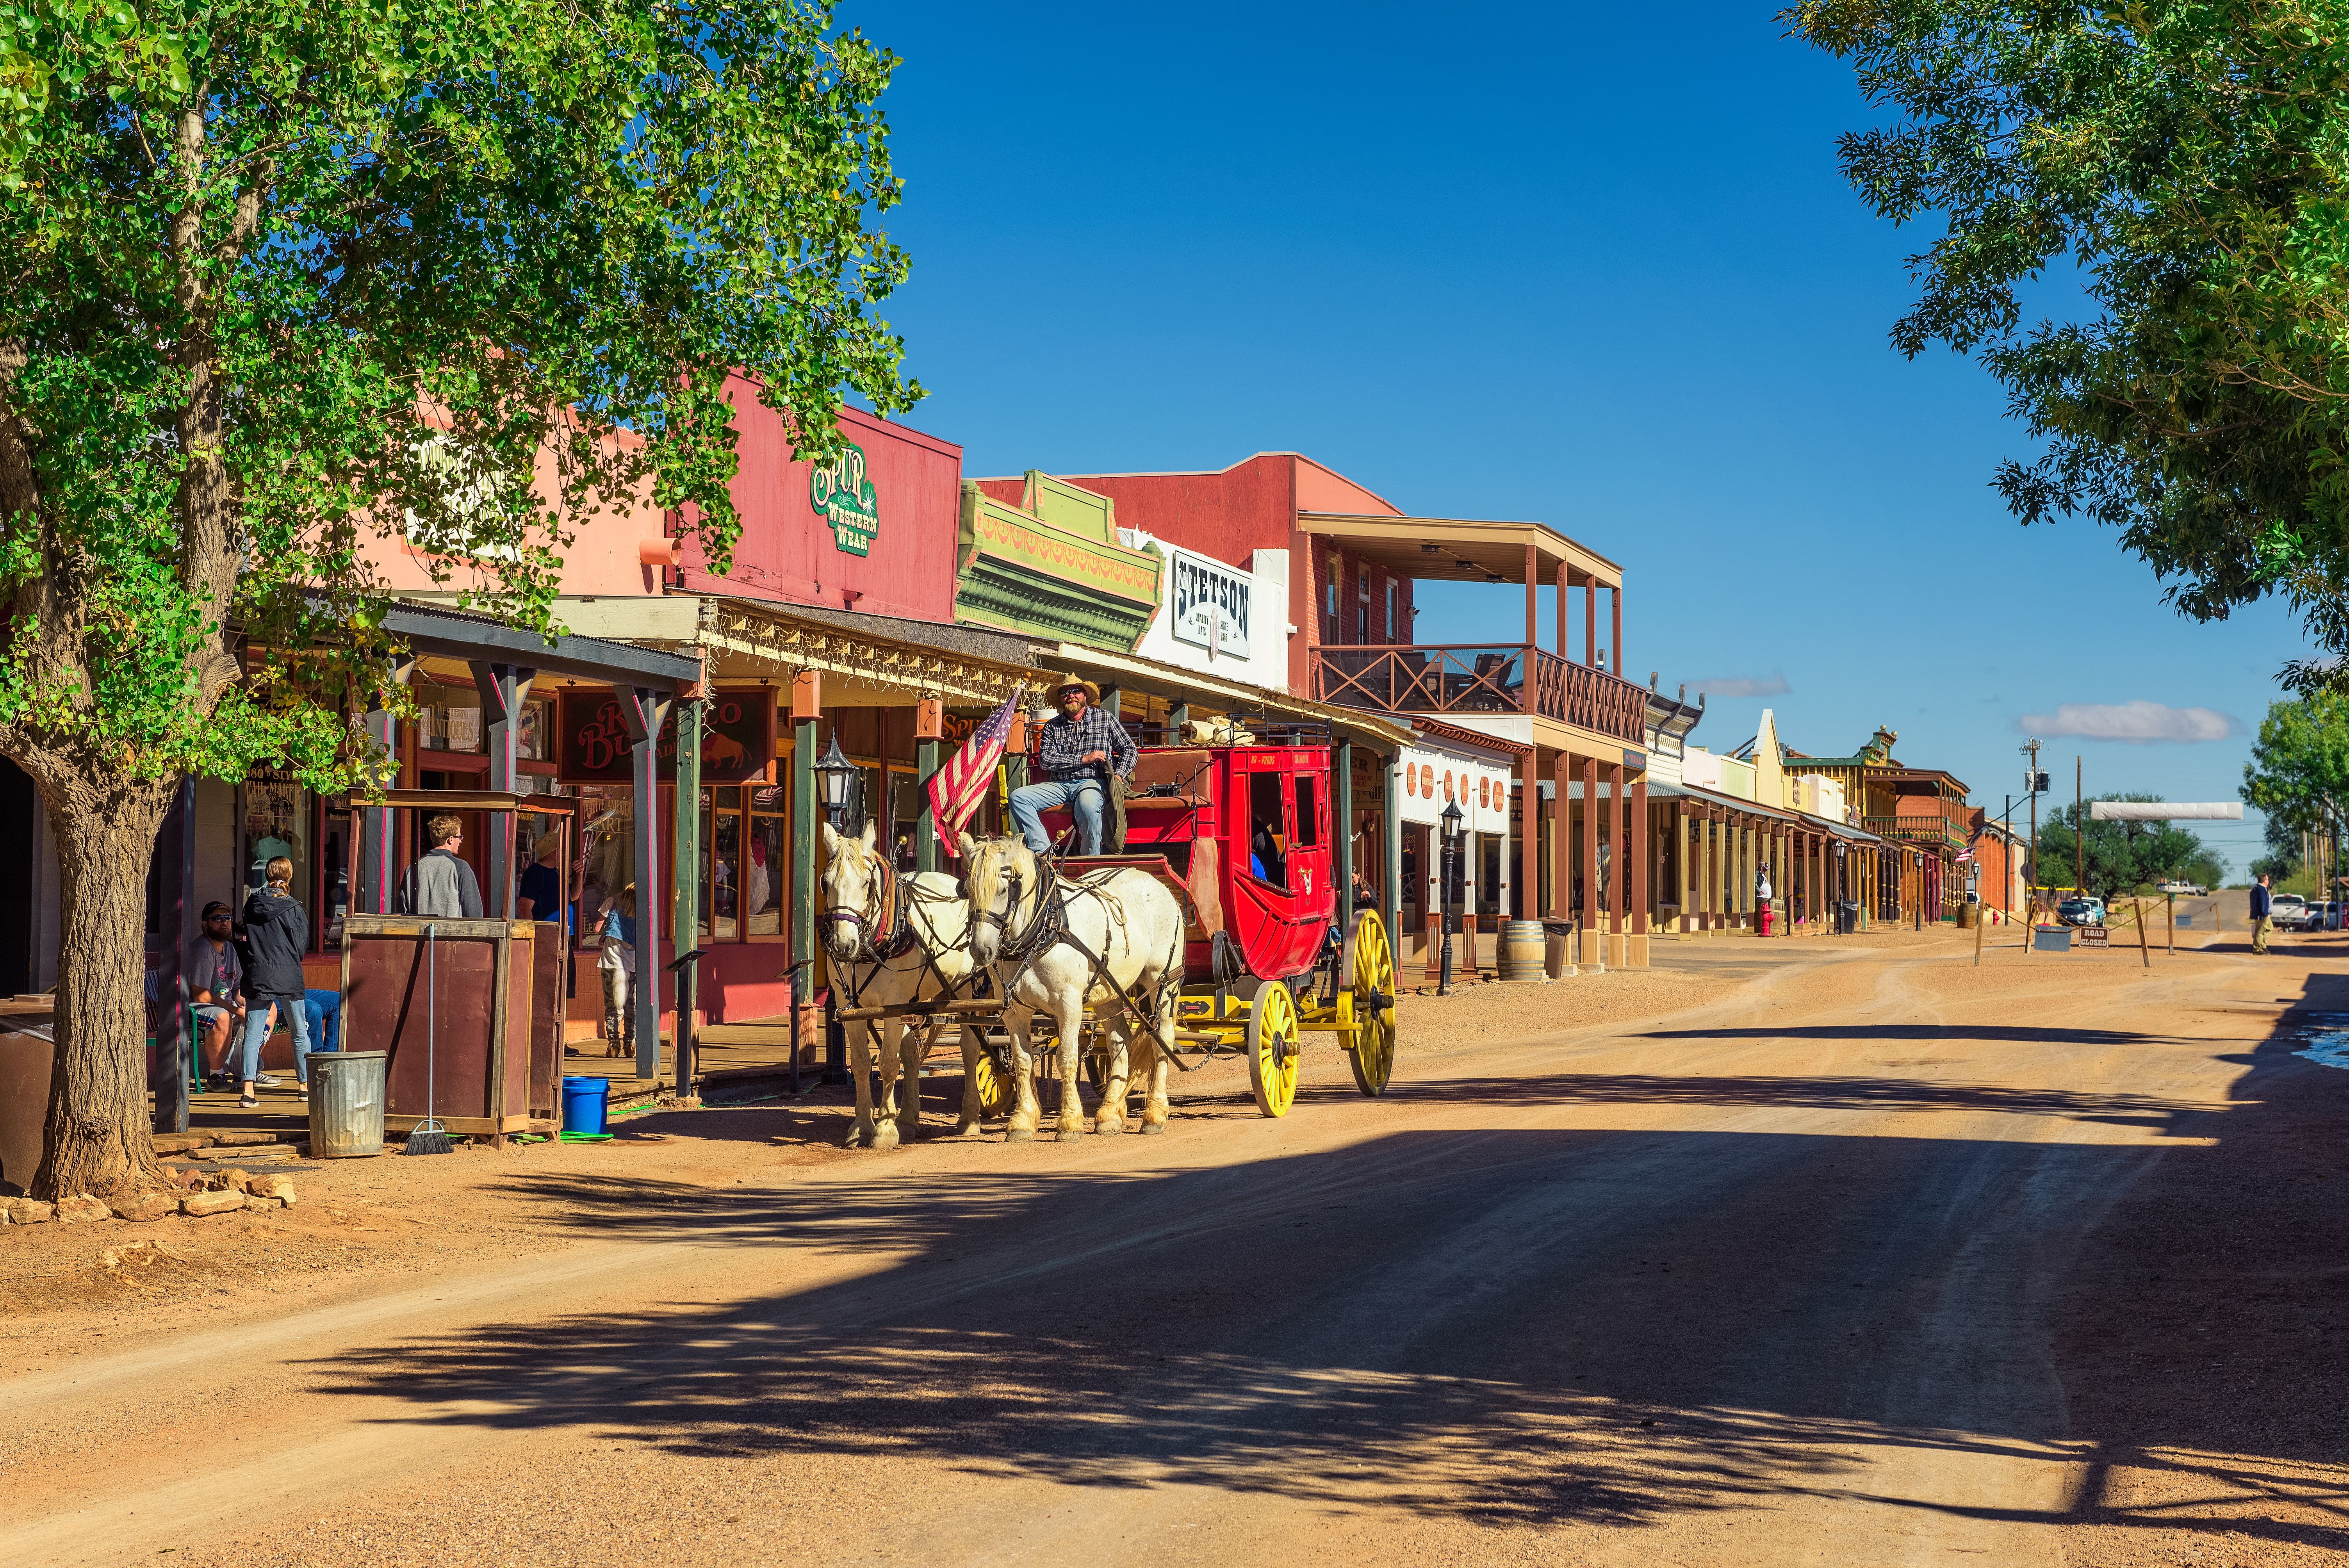 Historic Allen street with a horse drawn stagecoach in Tombstone